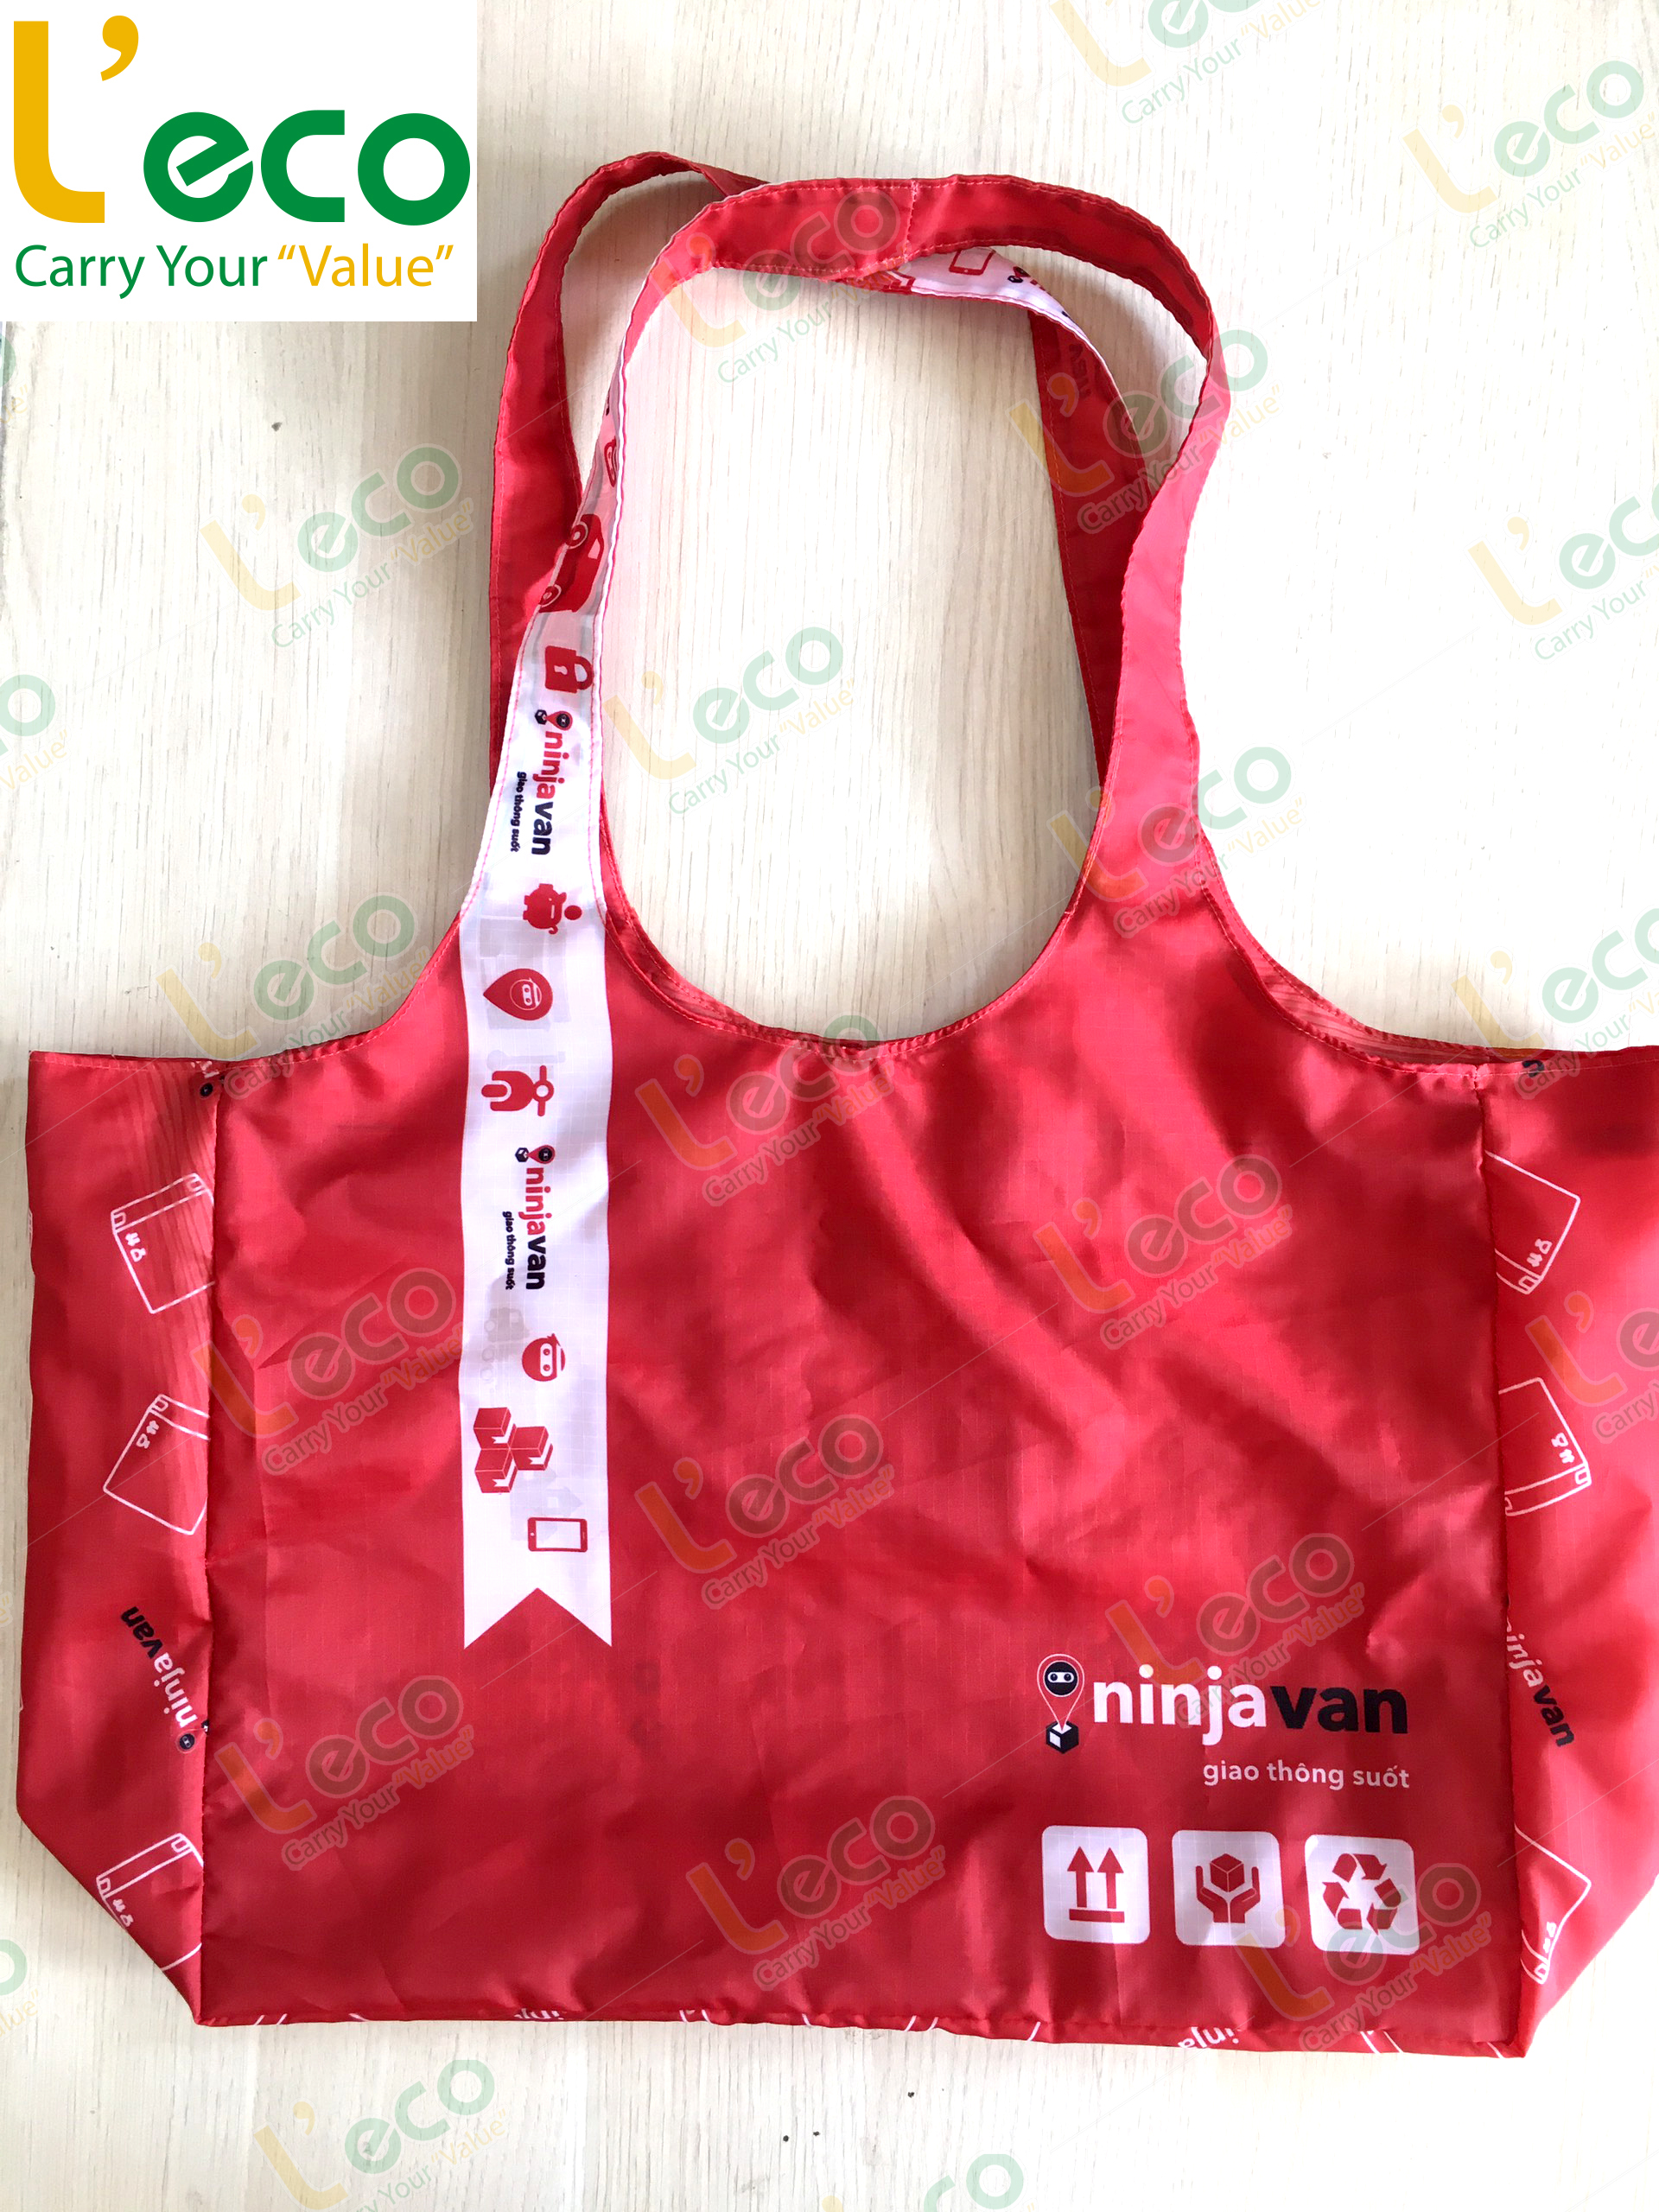 Polyester bags produced by An Van Thanh company